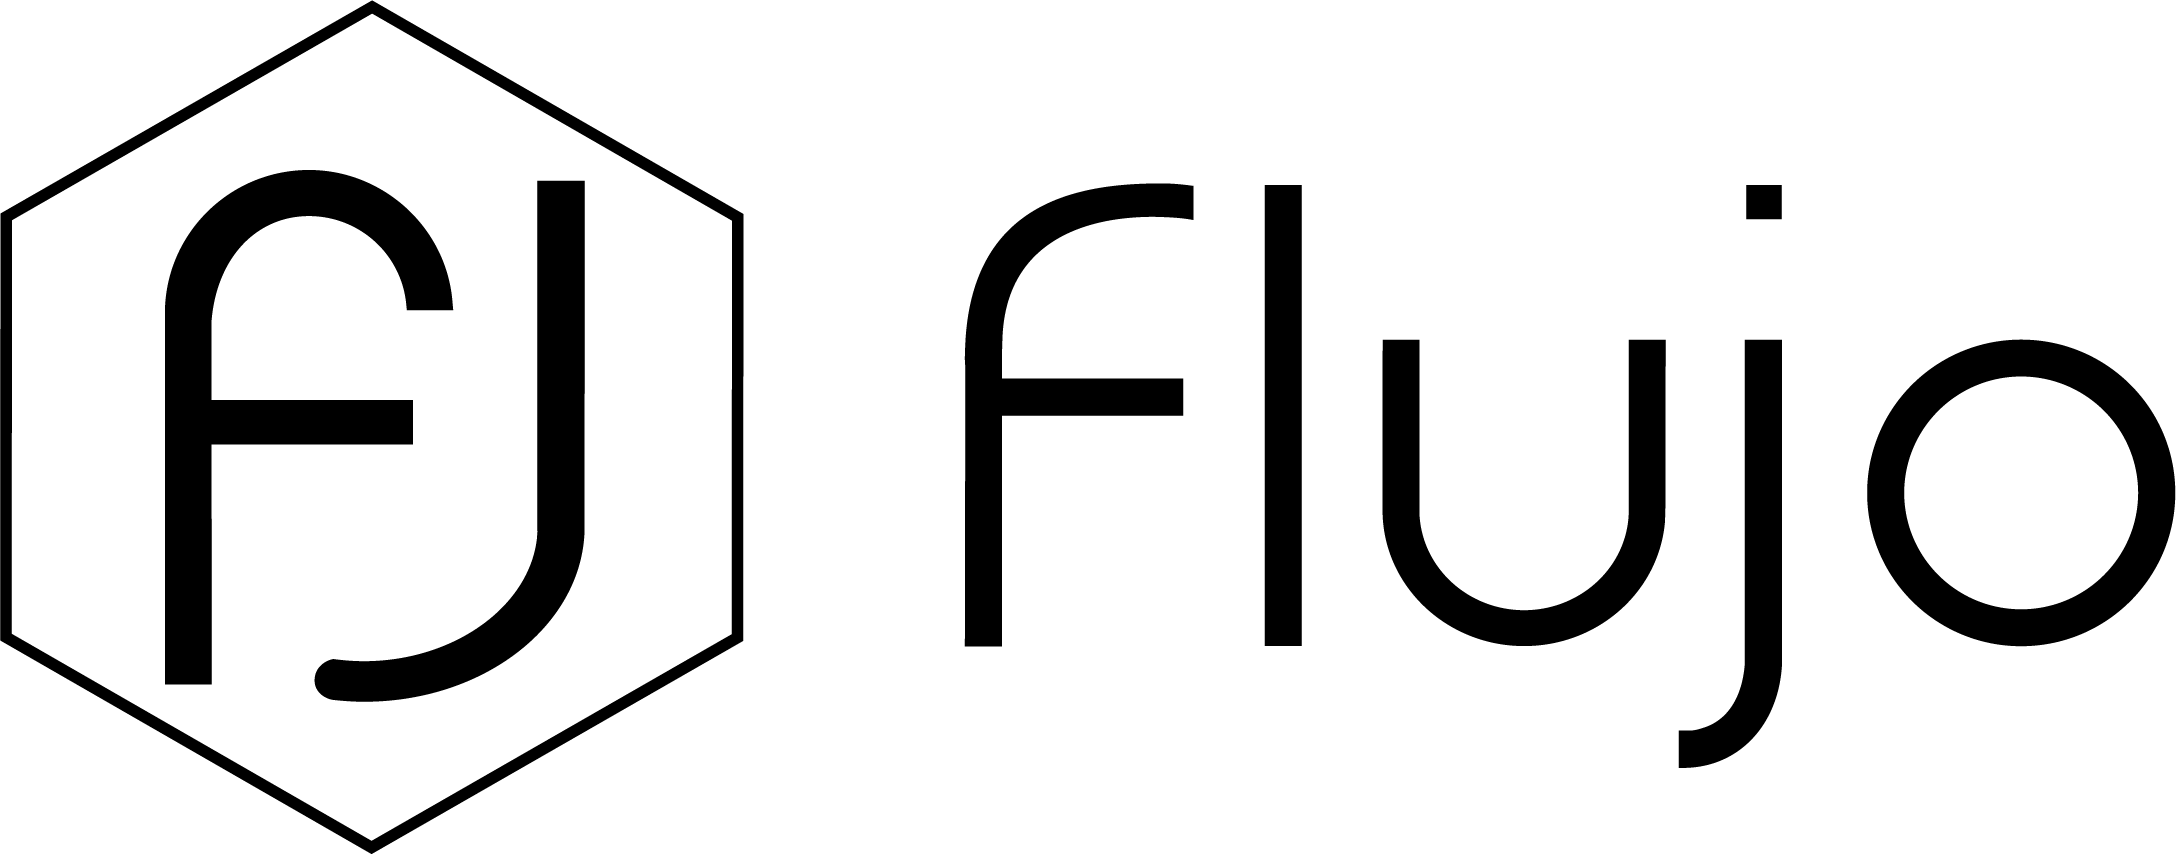 Flujo brand logo with stylized hexagon and bracketed initials 'FJ' in black on a white background